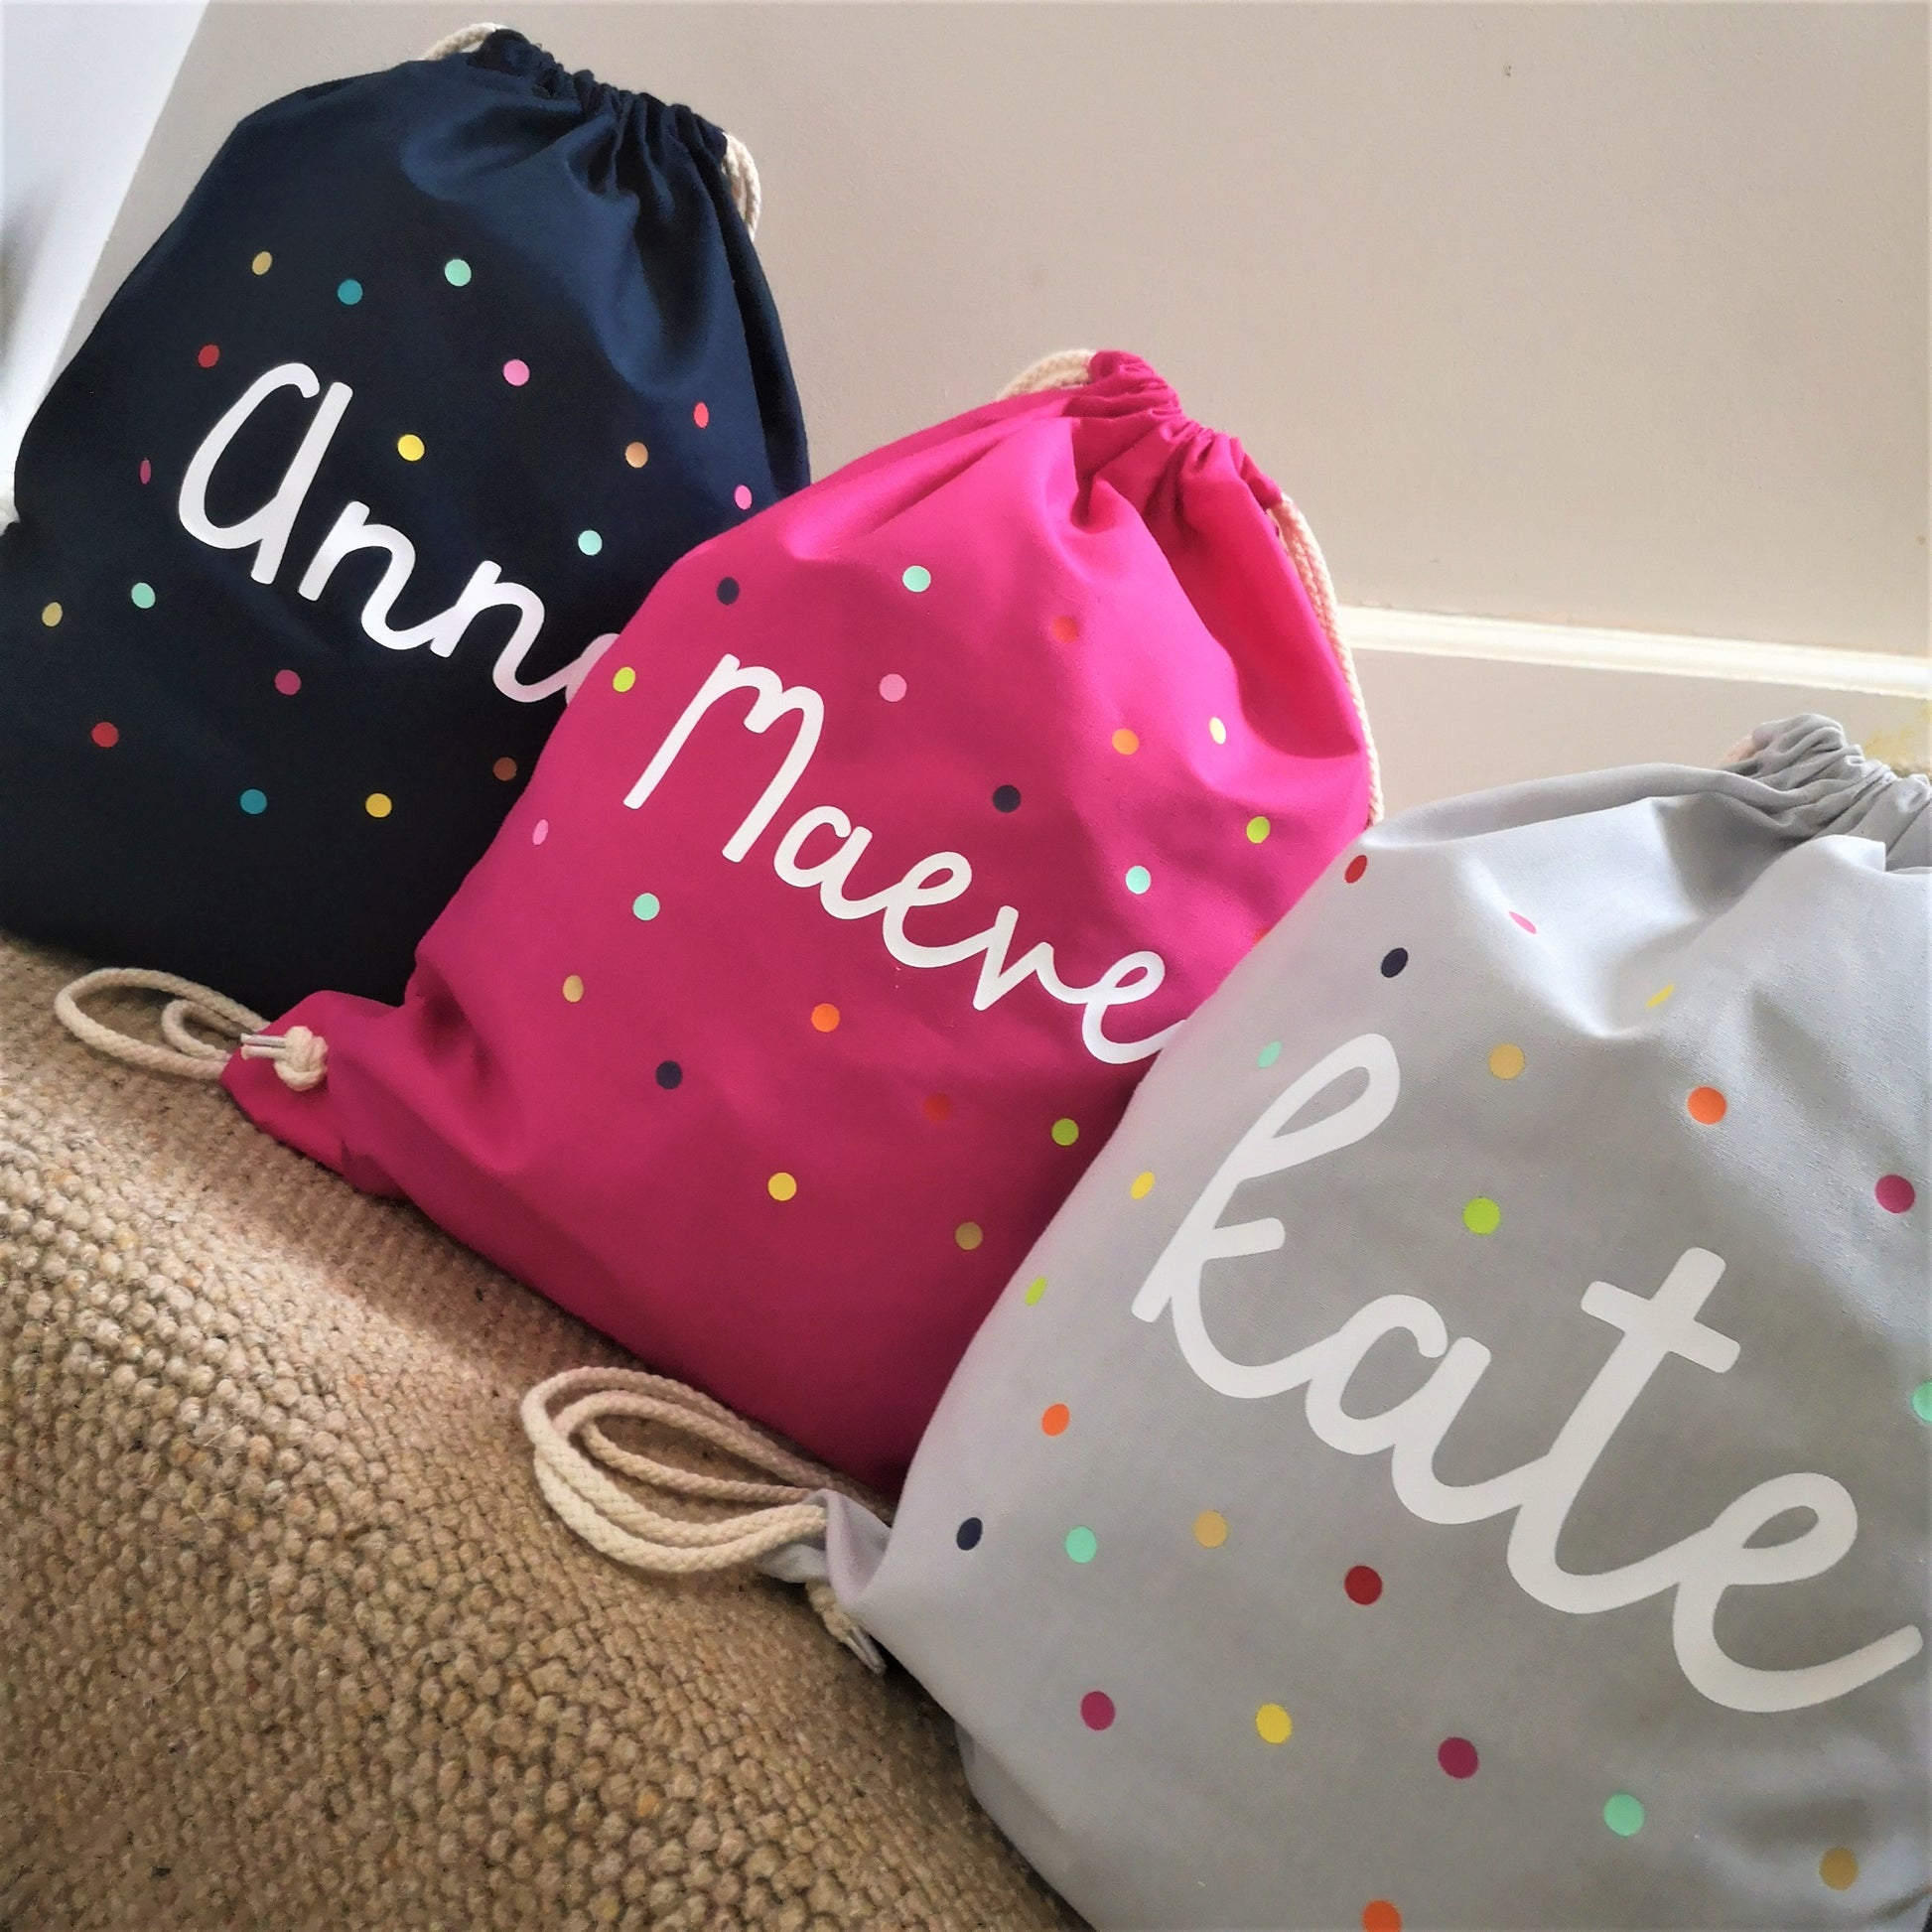 A photo showing the 3 bag colour choices of a personalised light cotton drawstring bag with dots and personalised with a name.  The 3 colour choices are french navy, fuschia pink and light grey